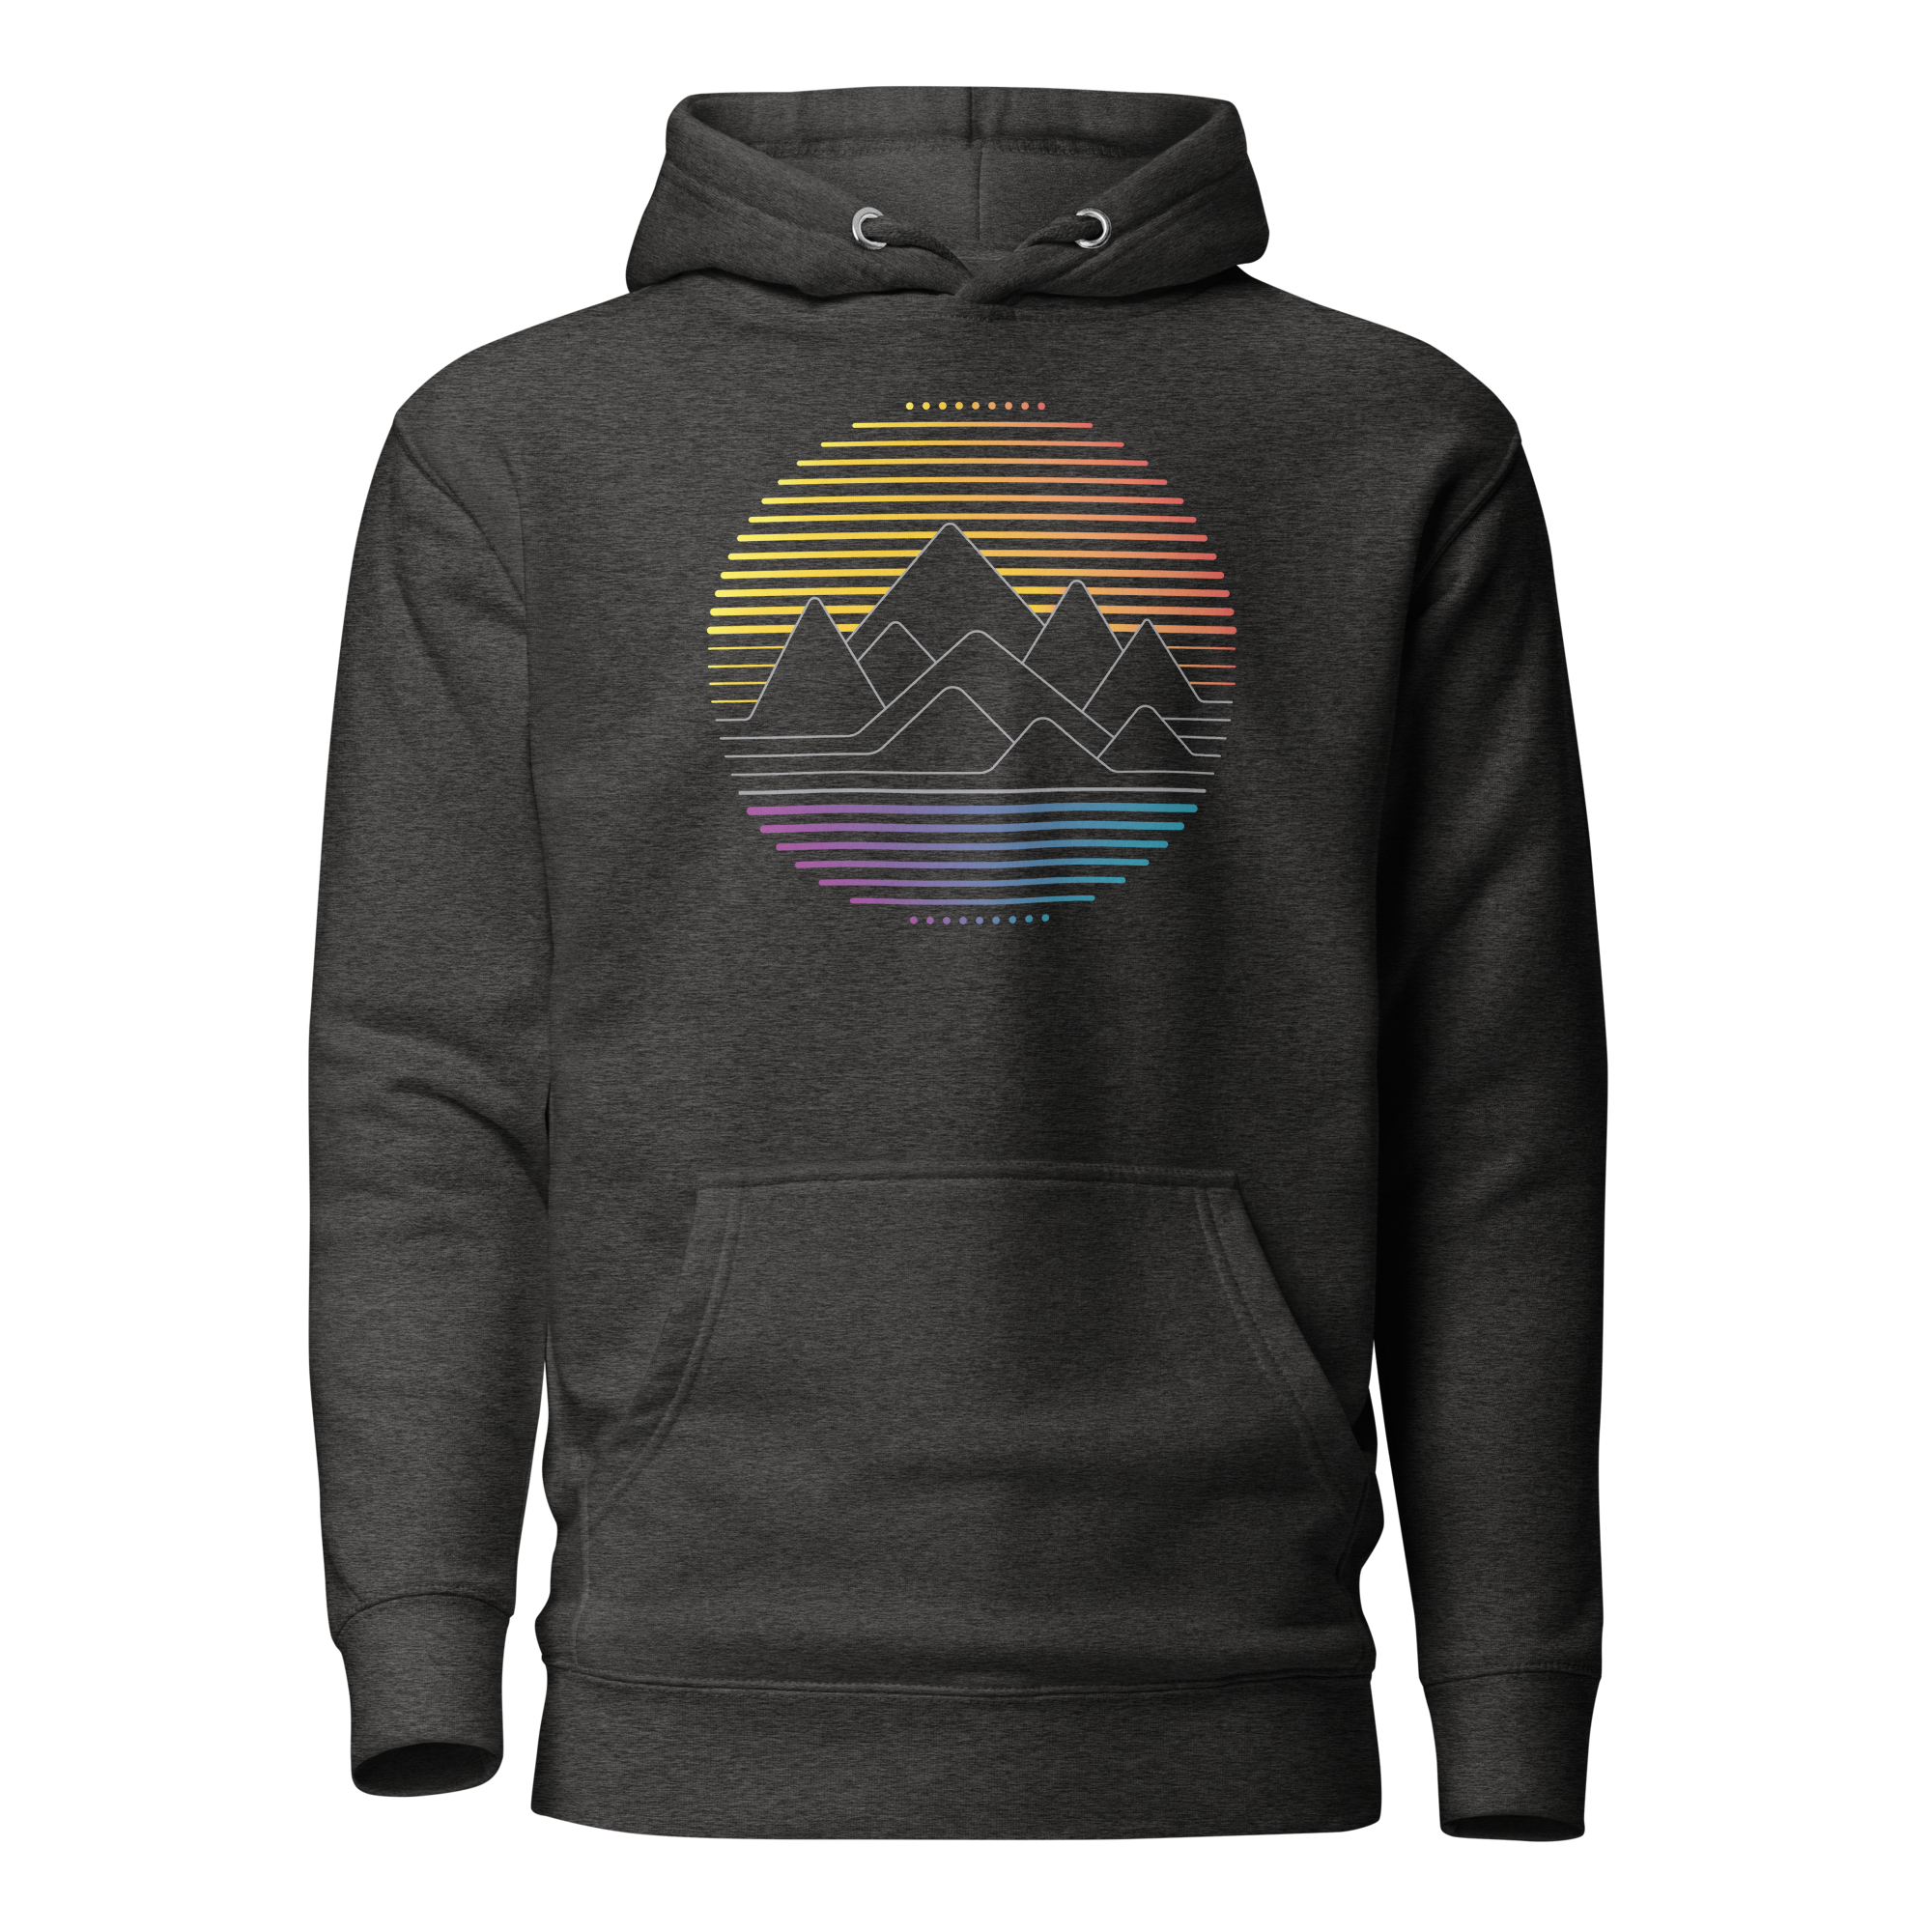 Charcoal Heather Galactic Sandcastles Graphic Hoodie Front View